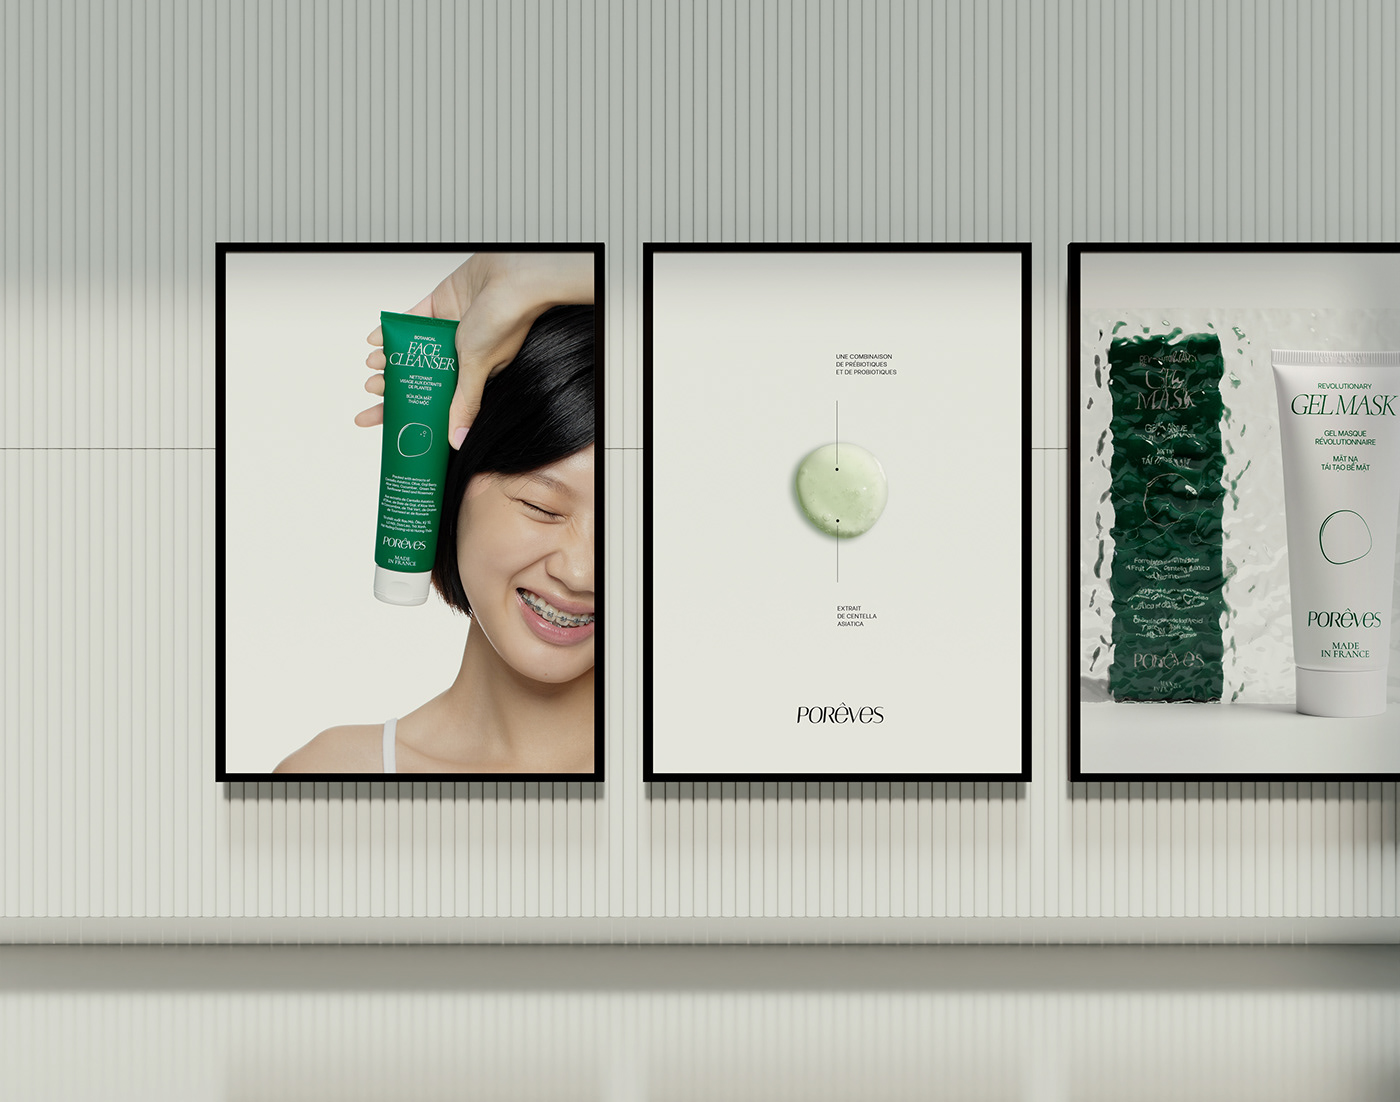 cosmetics skincare beauty natural Packaging brand identity Medicinal Webdesign science green aesthetic